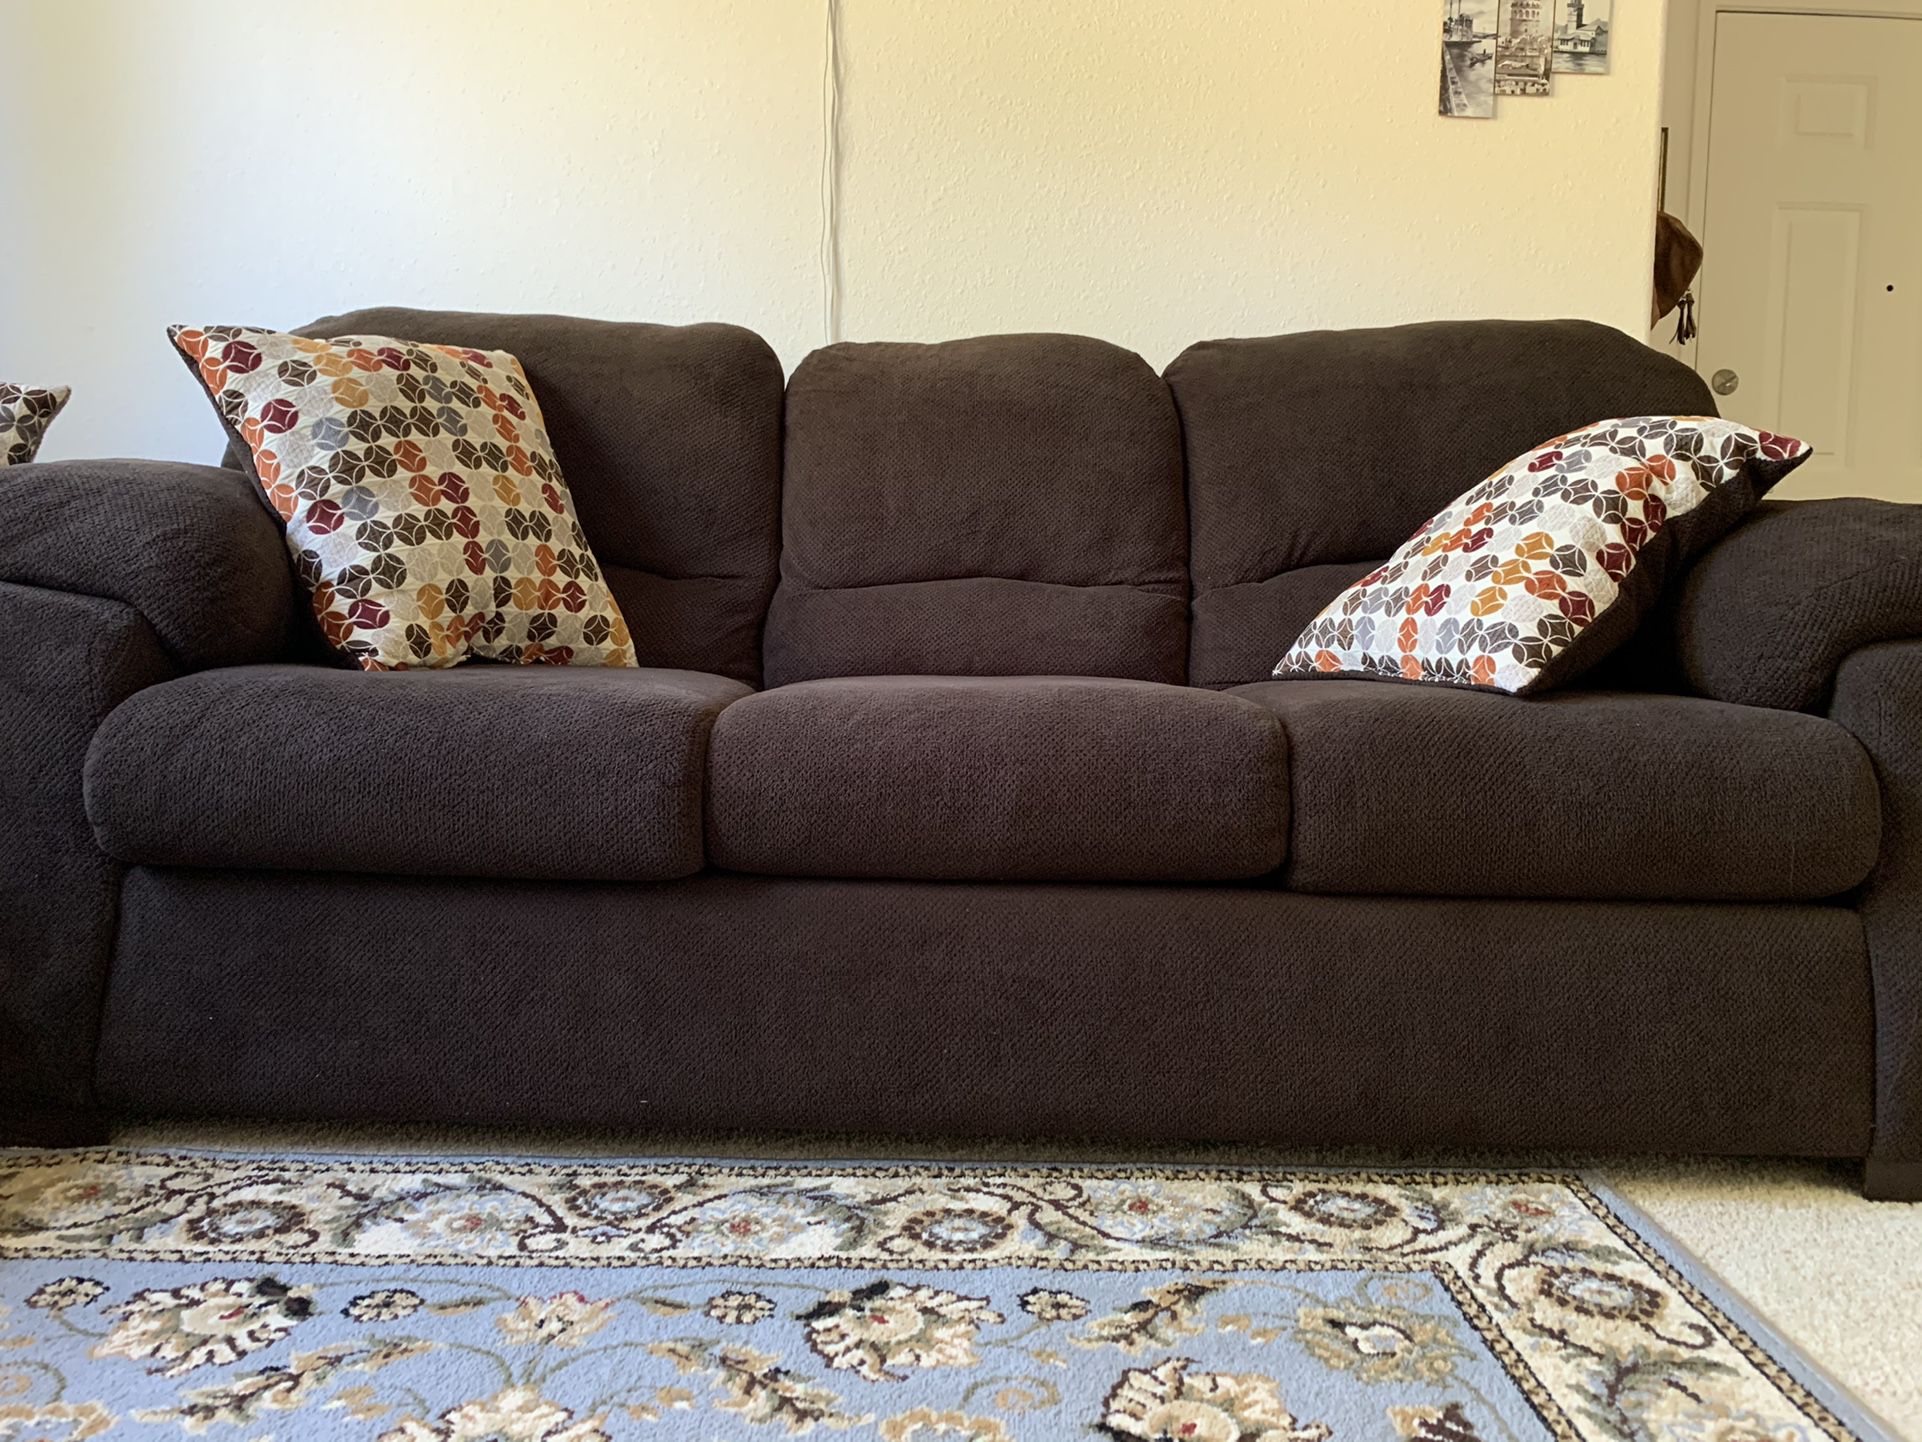 Brown And Grey Color Sofas Clean Pet Free 3 Years Old